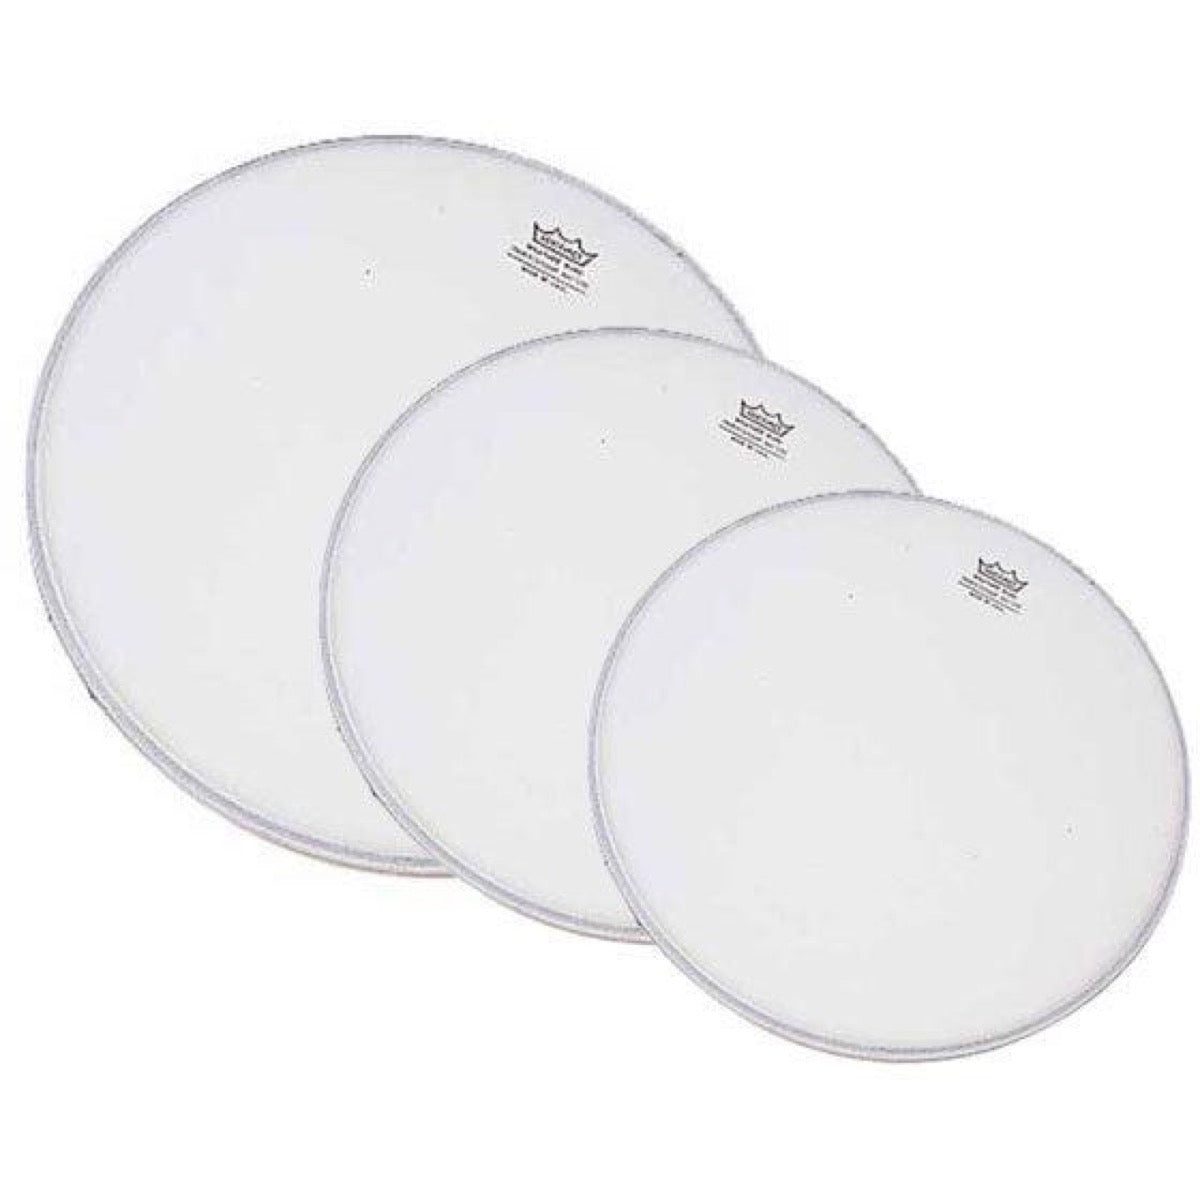 Remo Coated Ambassador Tom Drumhead Pack, Pack 1, 12, 13, and 16 Inch